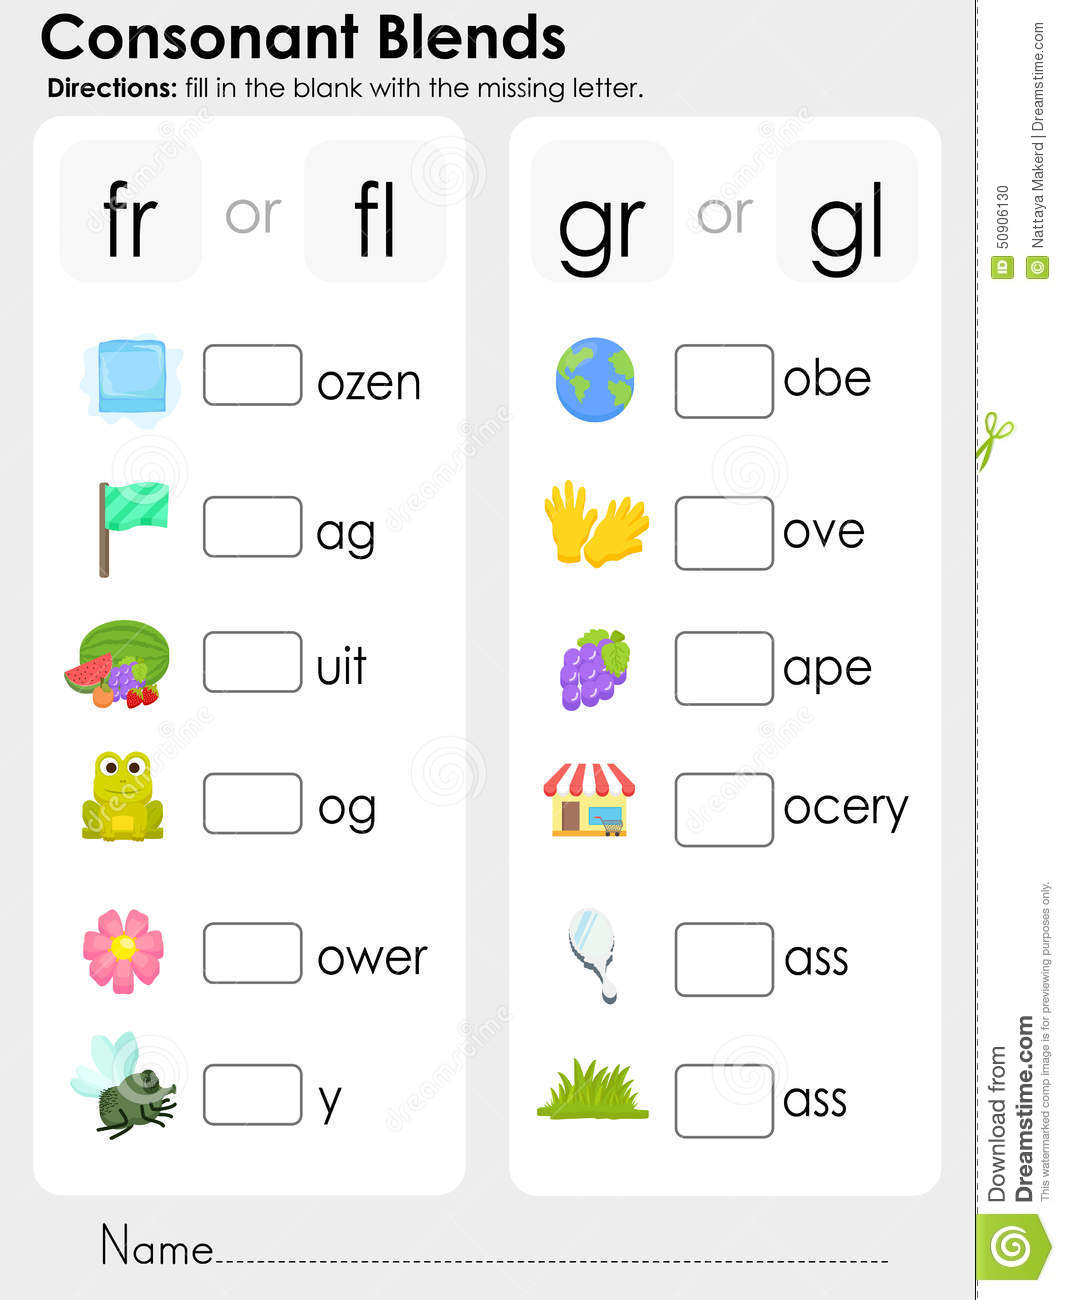 Agreeable Consonant Blends Worksheets With Additional Beginning